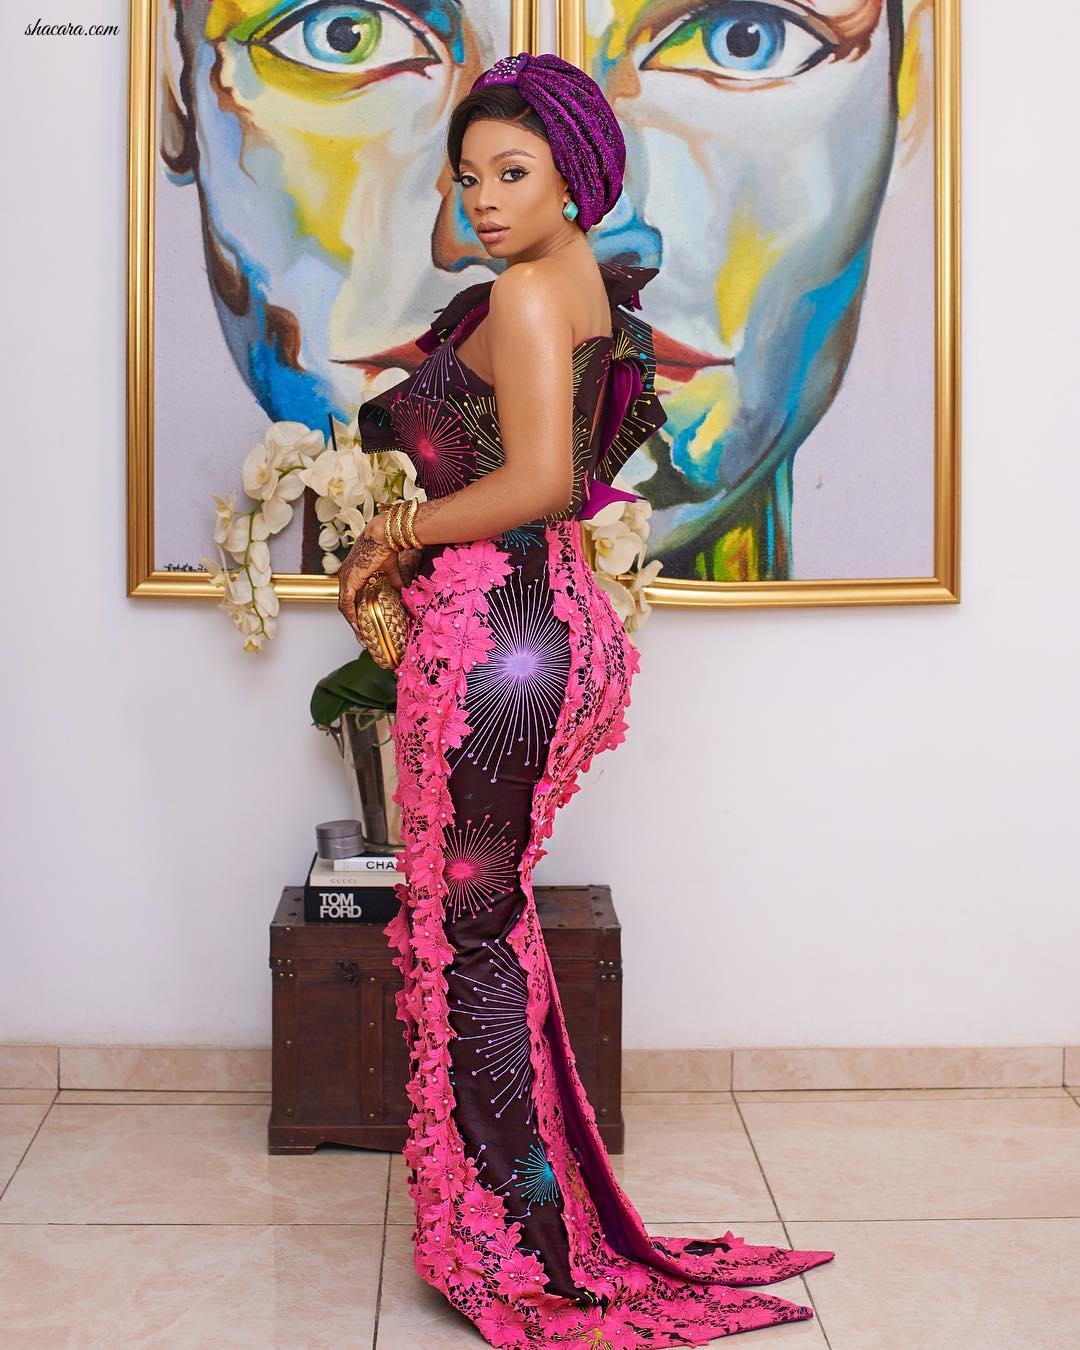 How Did Toke Makinwa Manage To Pull Off This Insanely Sculptural Look?